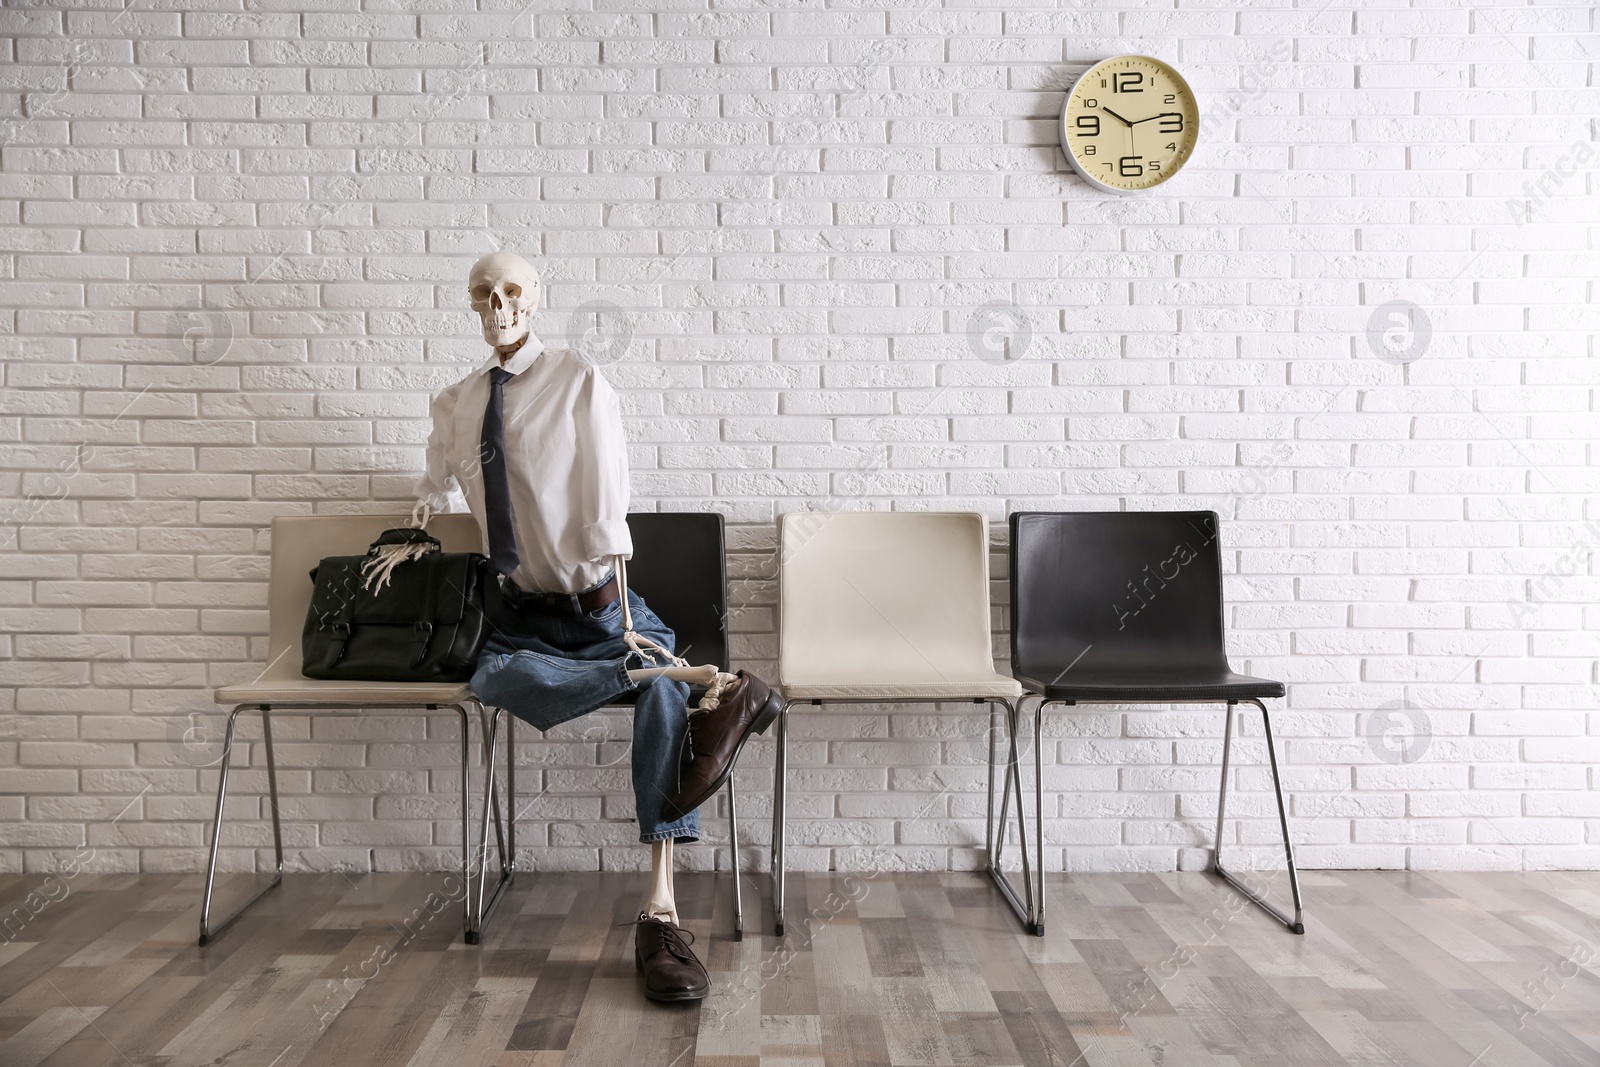 Photo of Human skeleton in office wear sitting on chair near brick wall indoors